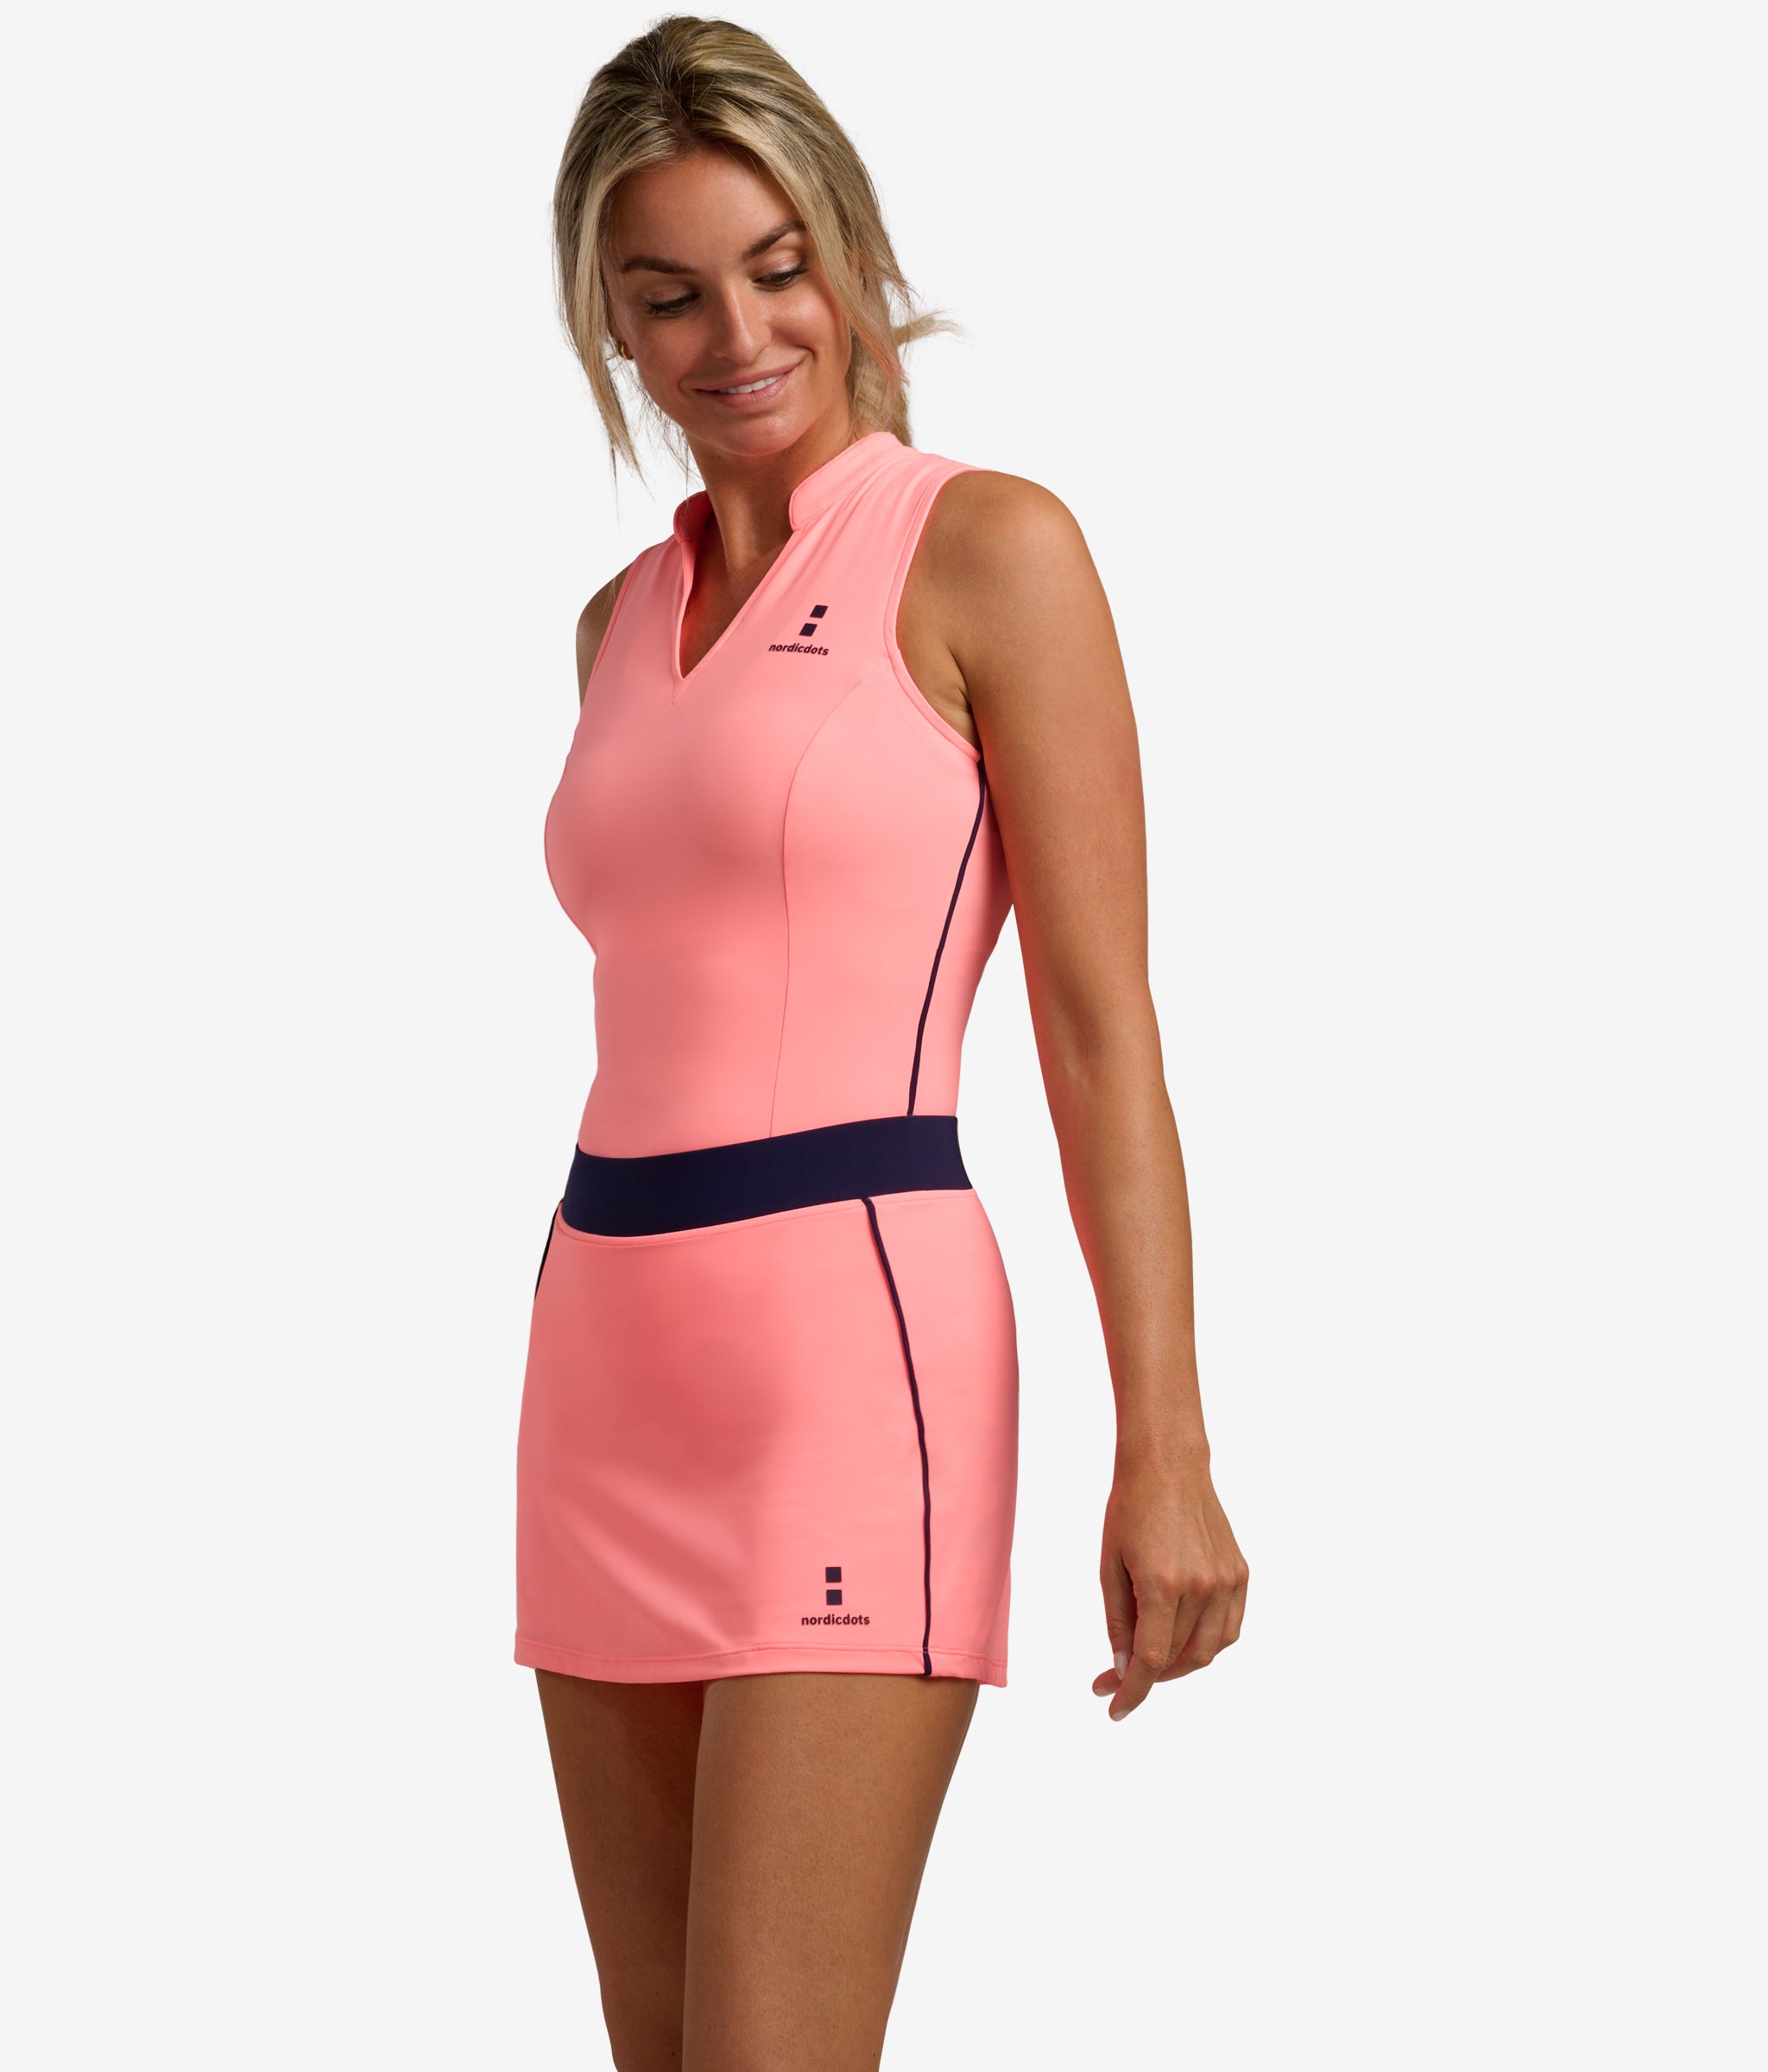 nordicdots elegance tee melon women tennis padel golf sustainable outfit